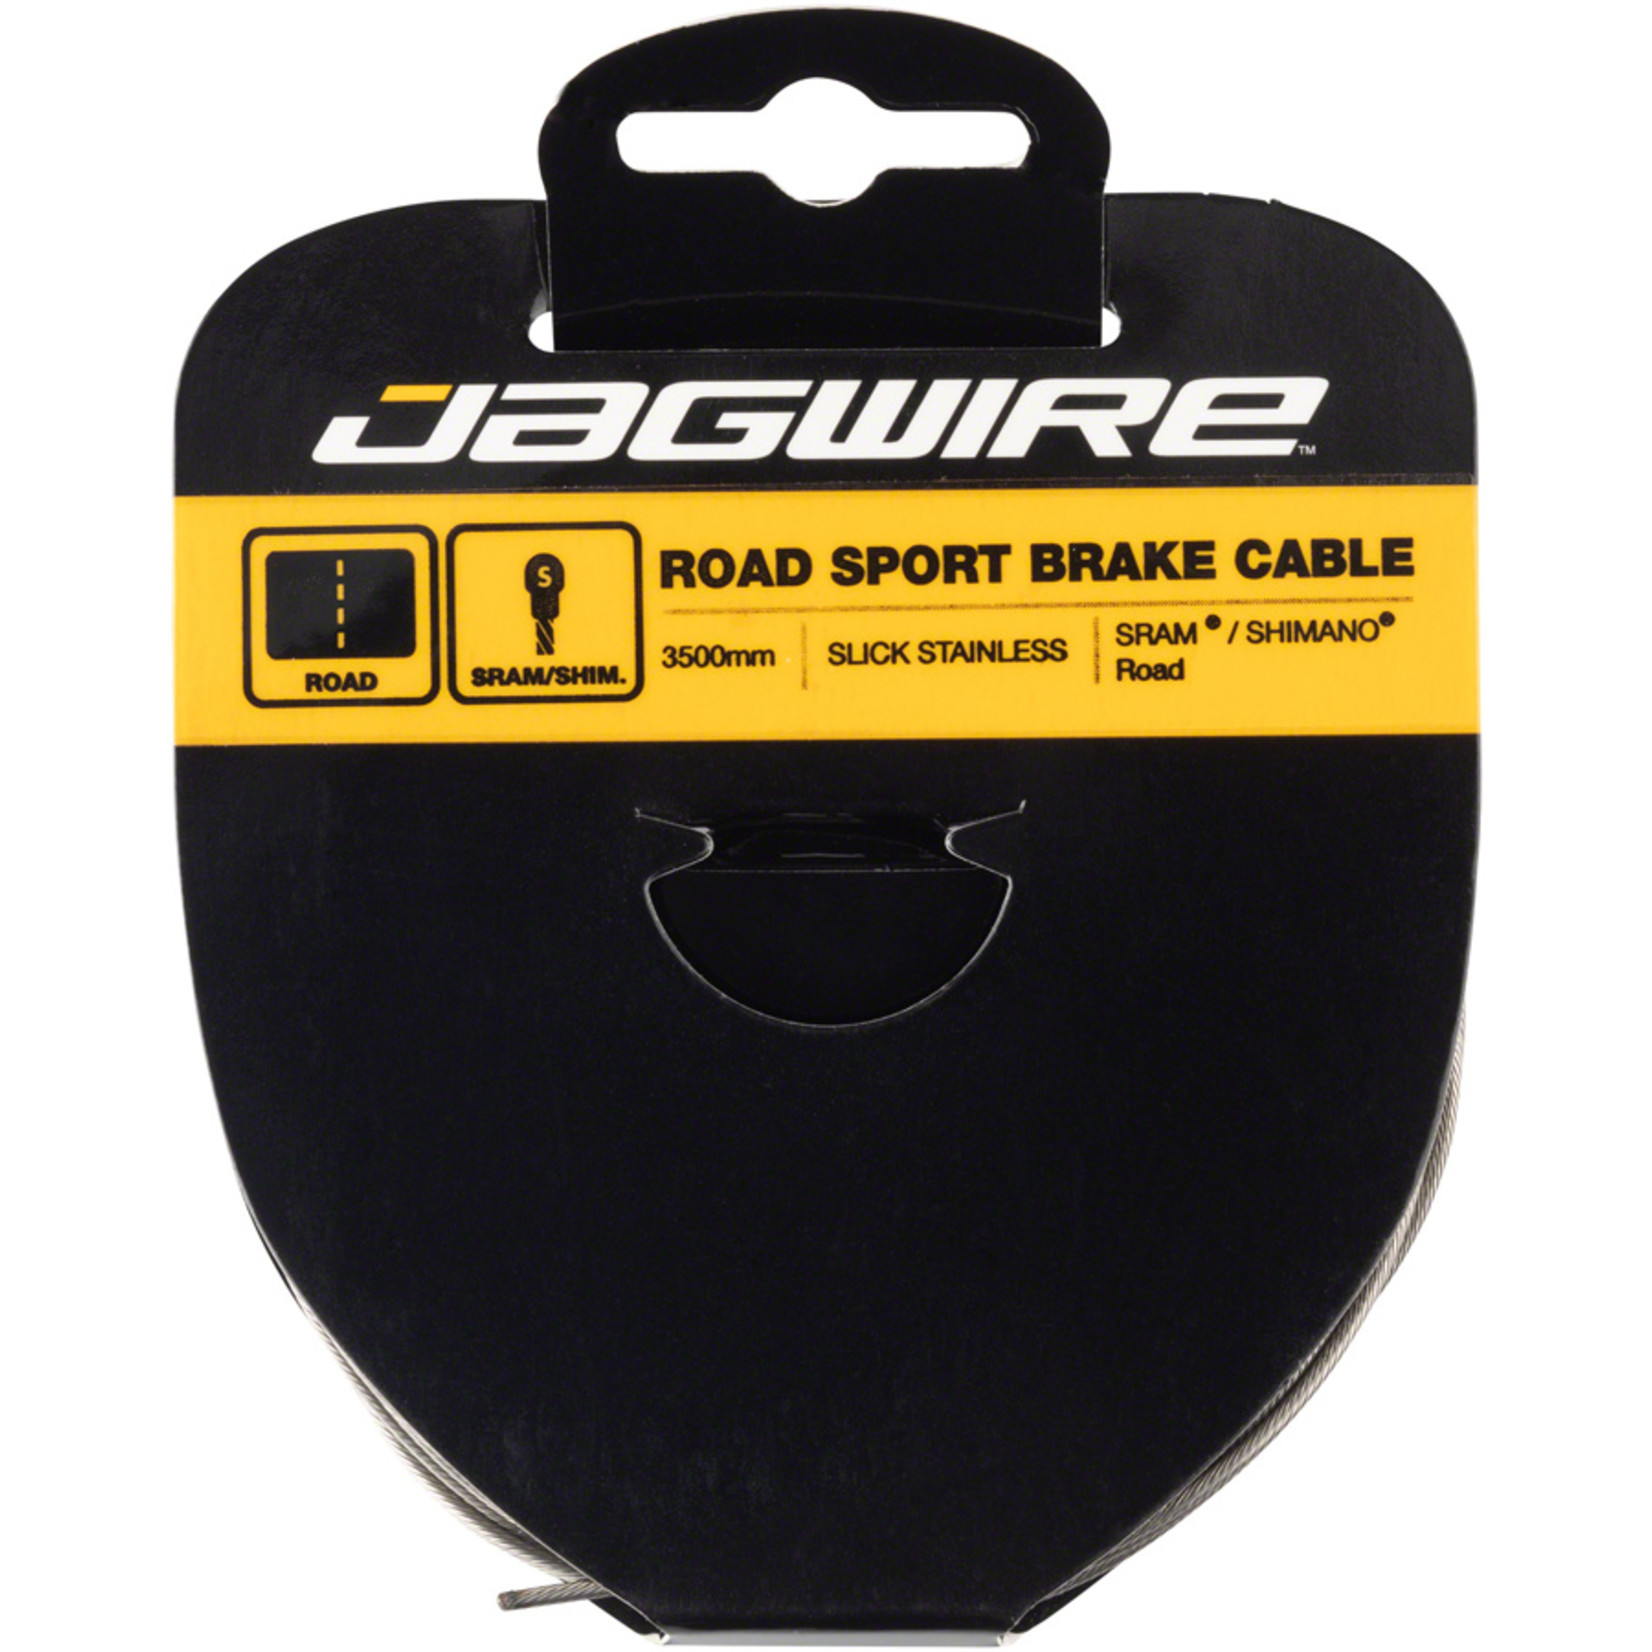 Jagwire Jagwire Sport Brake Cable Slick Stainless 1.5x3500mm SRAM/Shimano Road Tandem